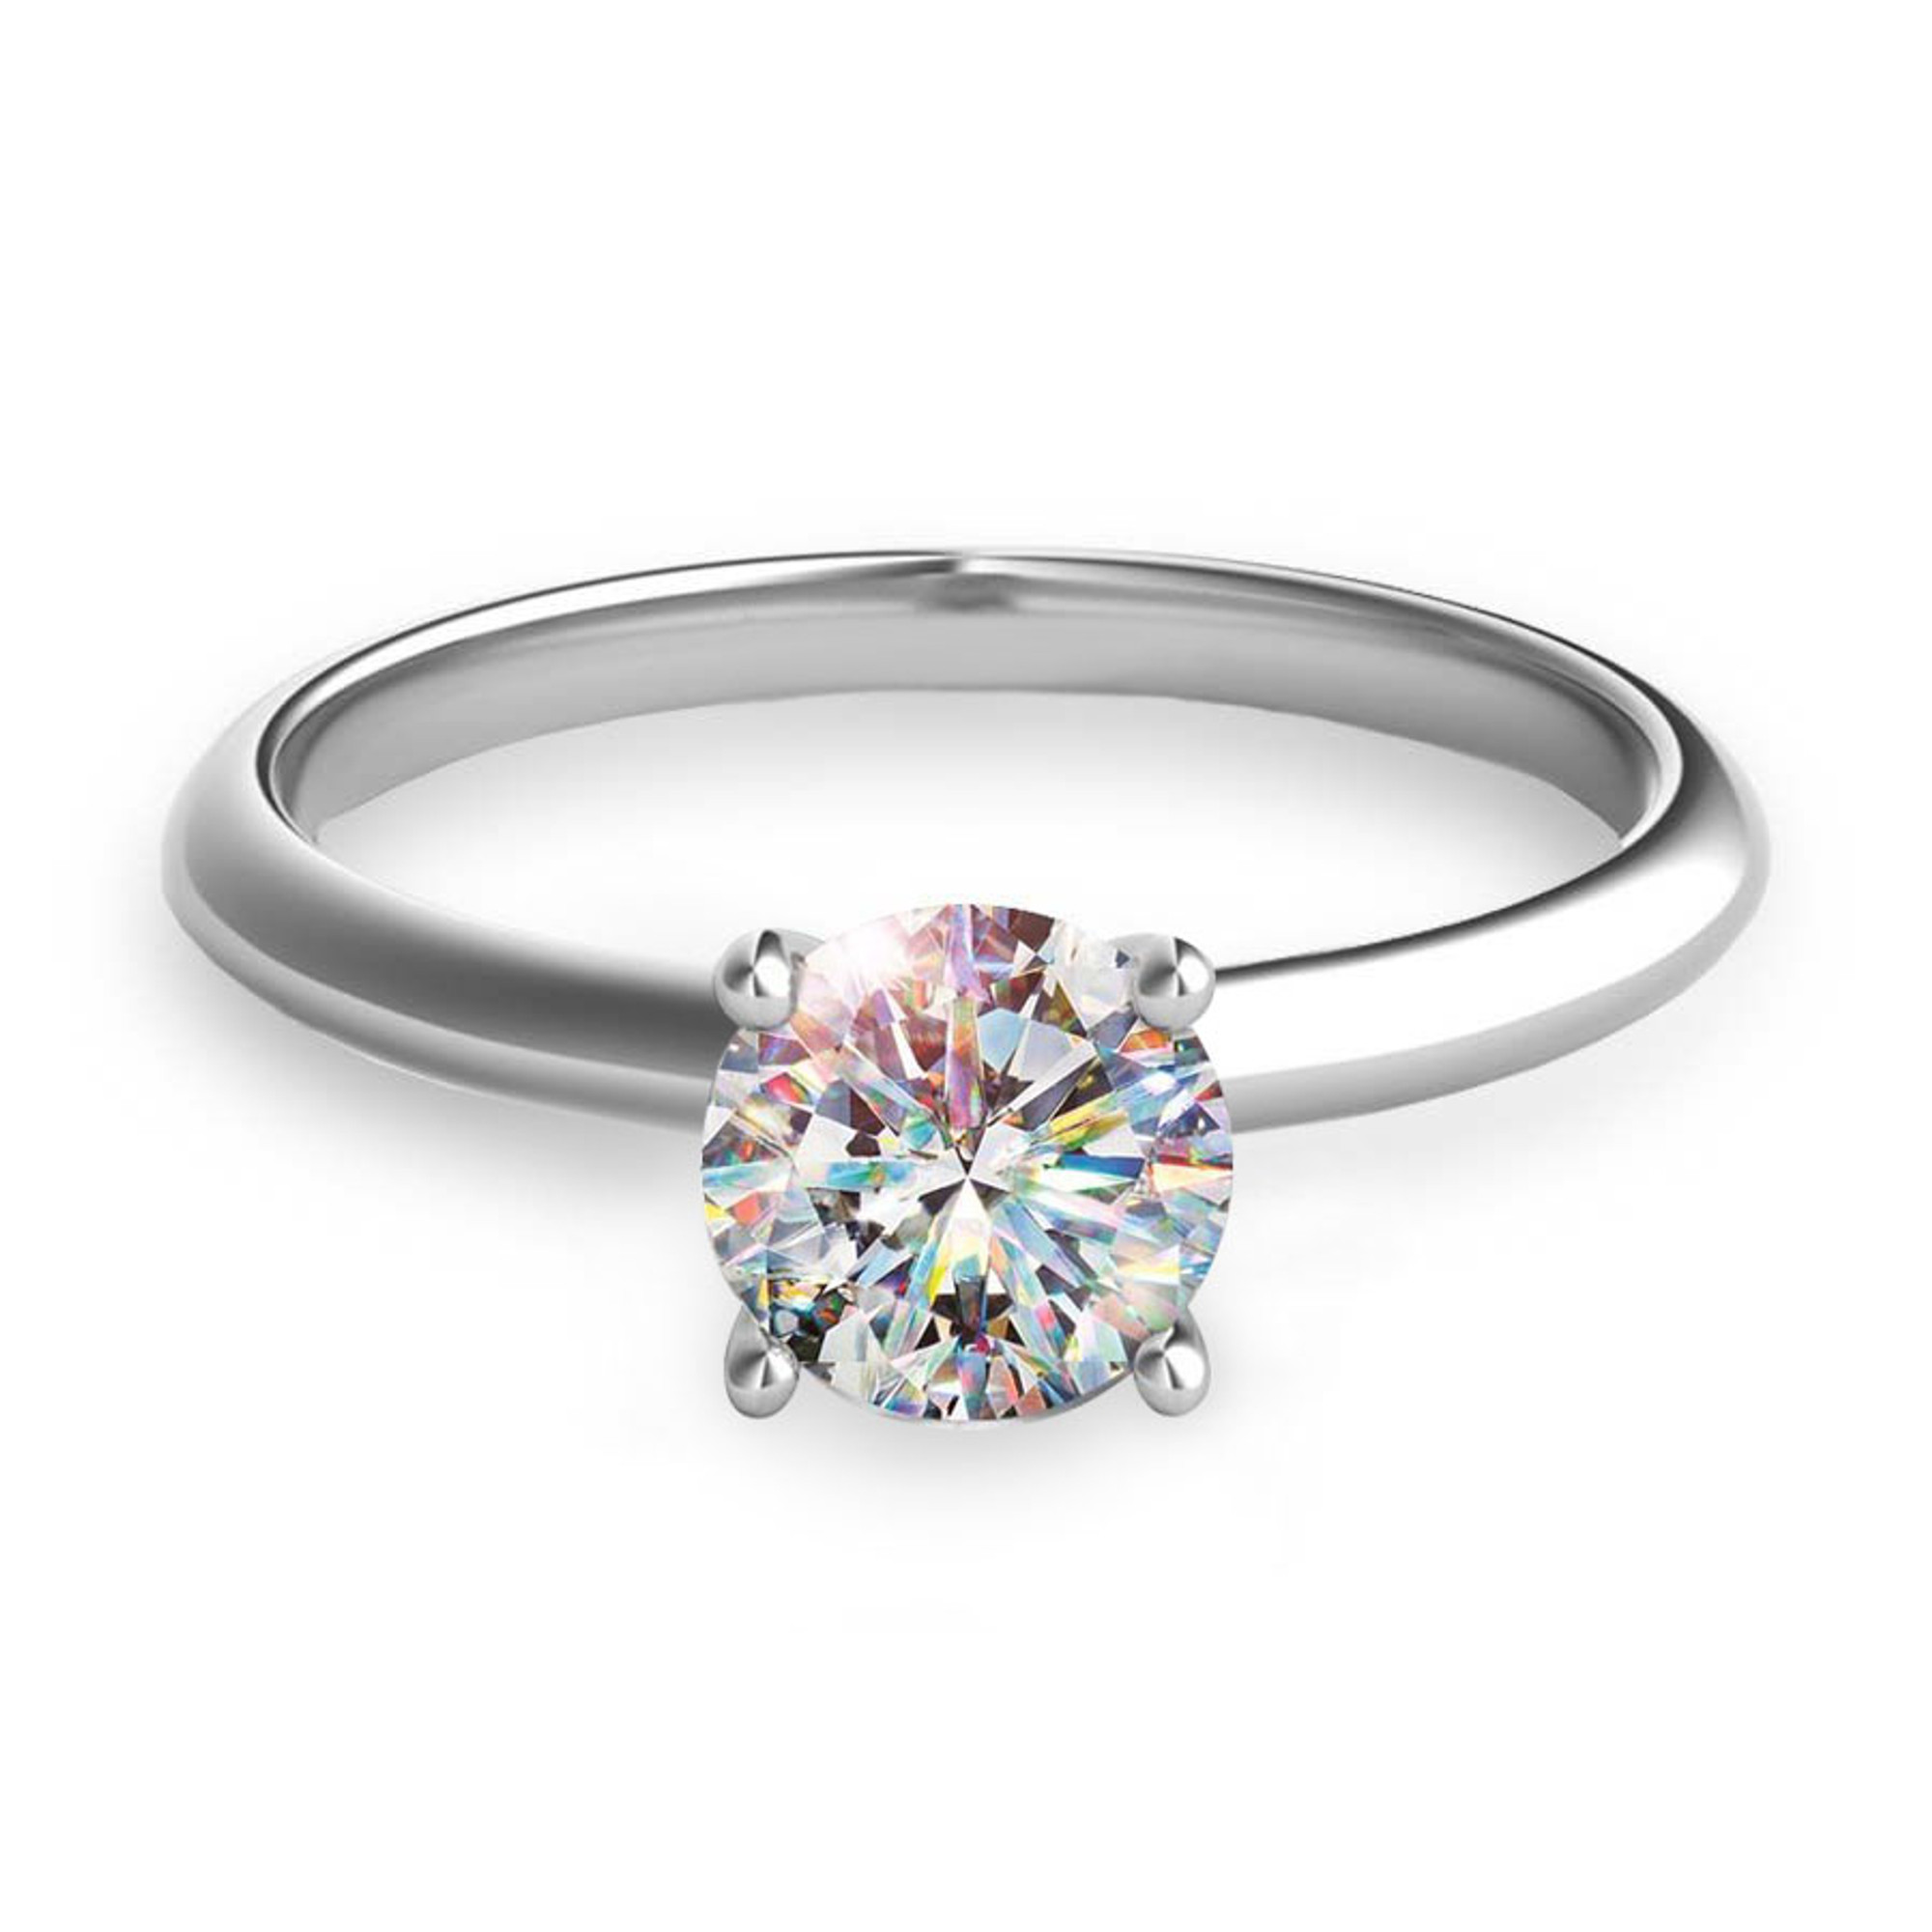 Facets of Fire Diamond - 1.65ct